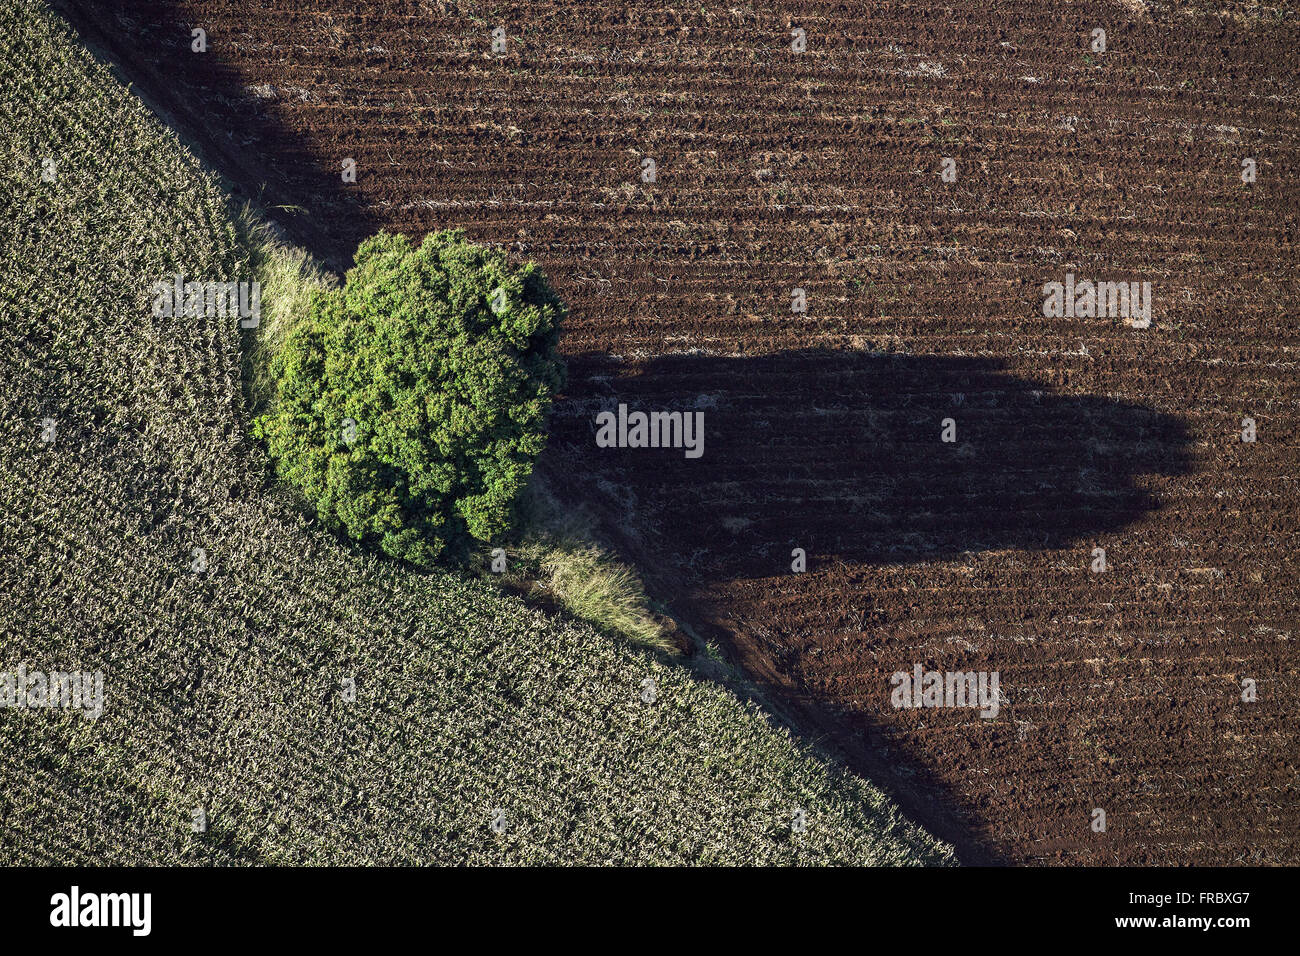 Aerial view of corn crop Stock Photo